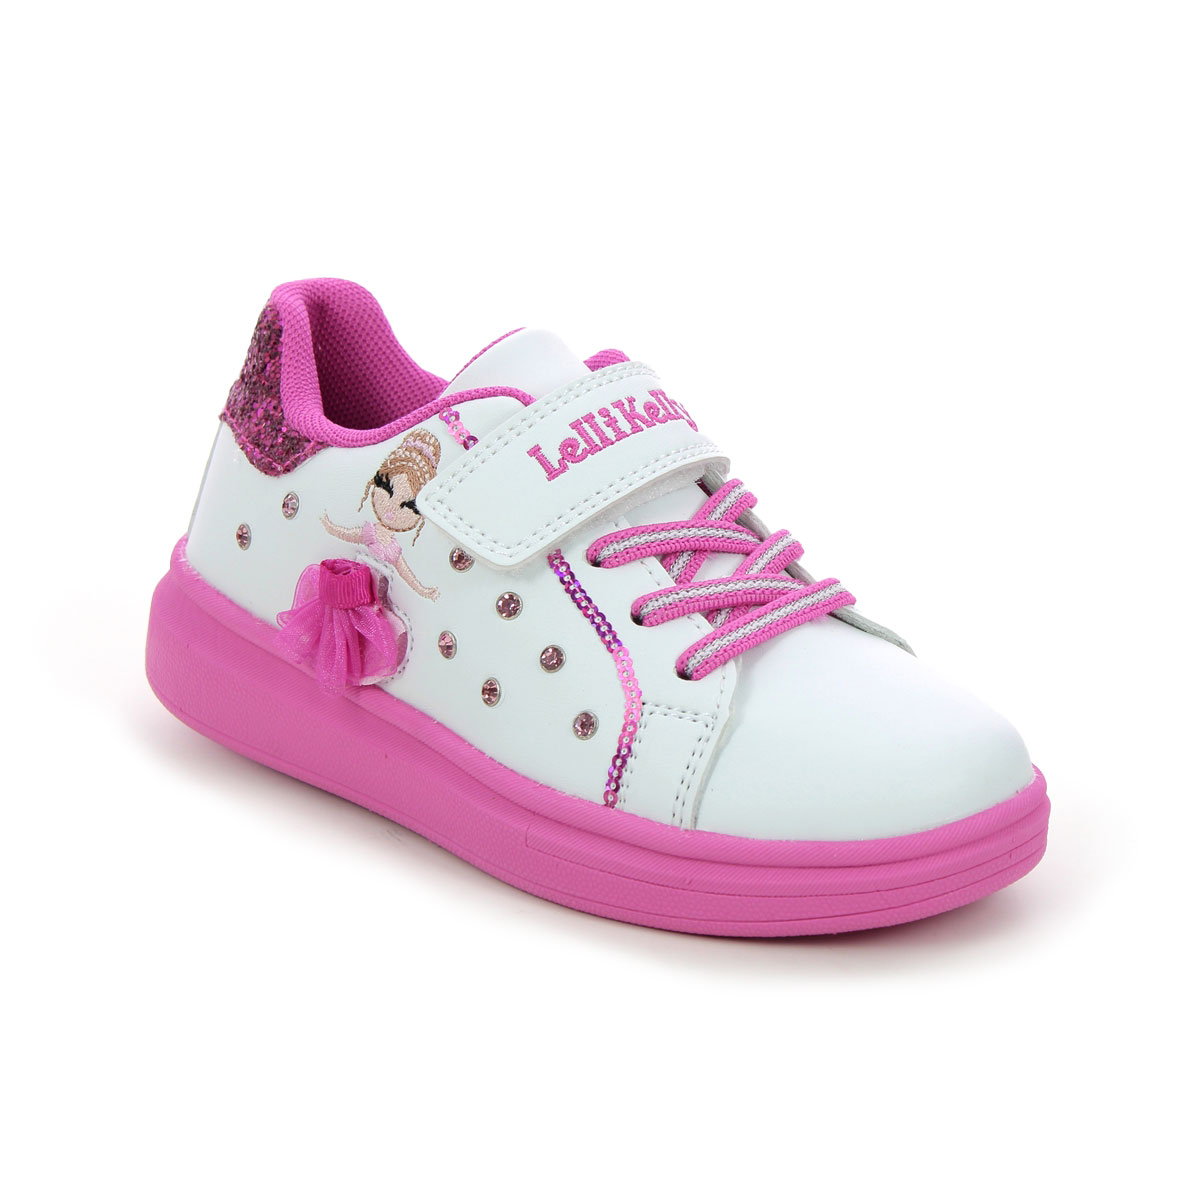 Lelli Kelly Mille Stelle Princess White Pink Kids girls trainers LK4826-AA63 in a Plain Man-made in Size 35